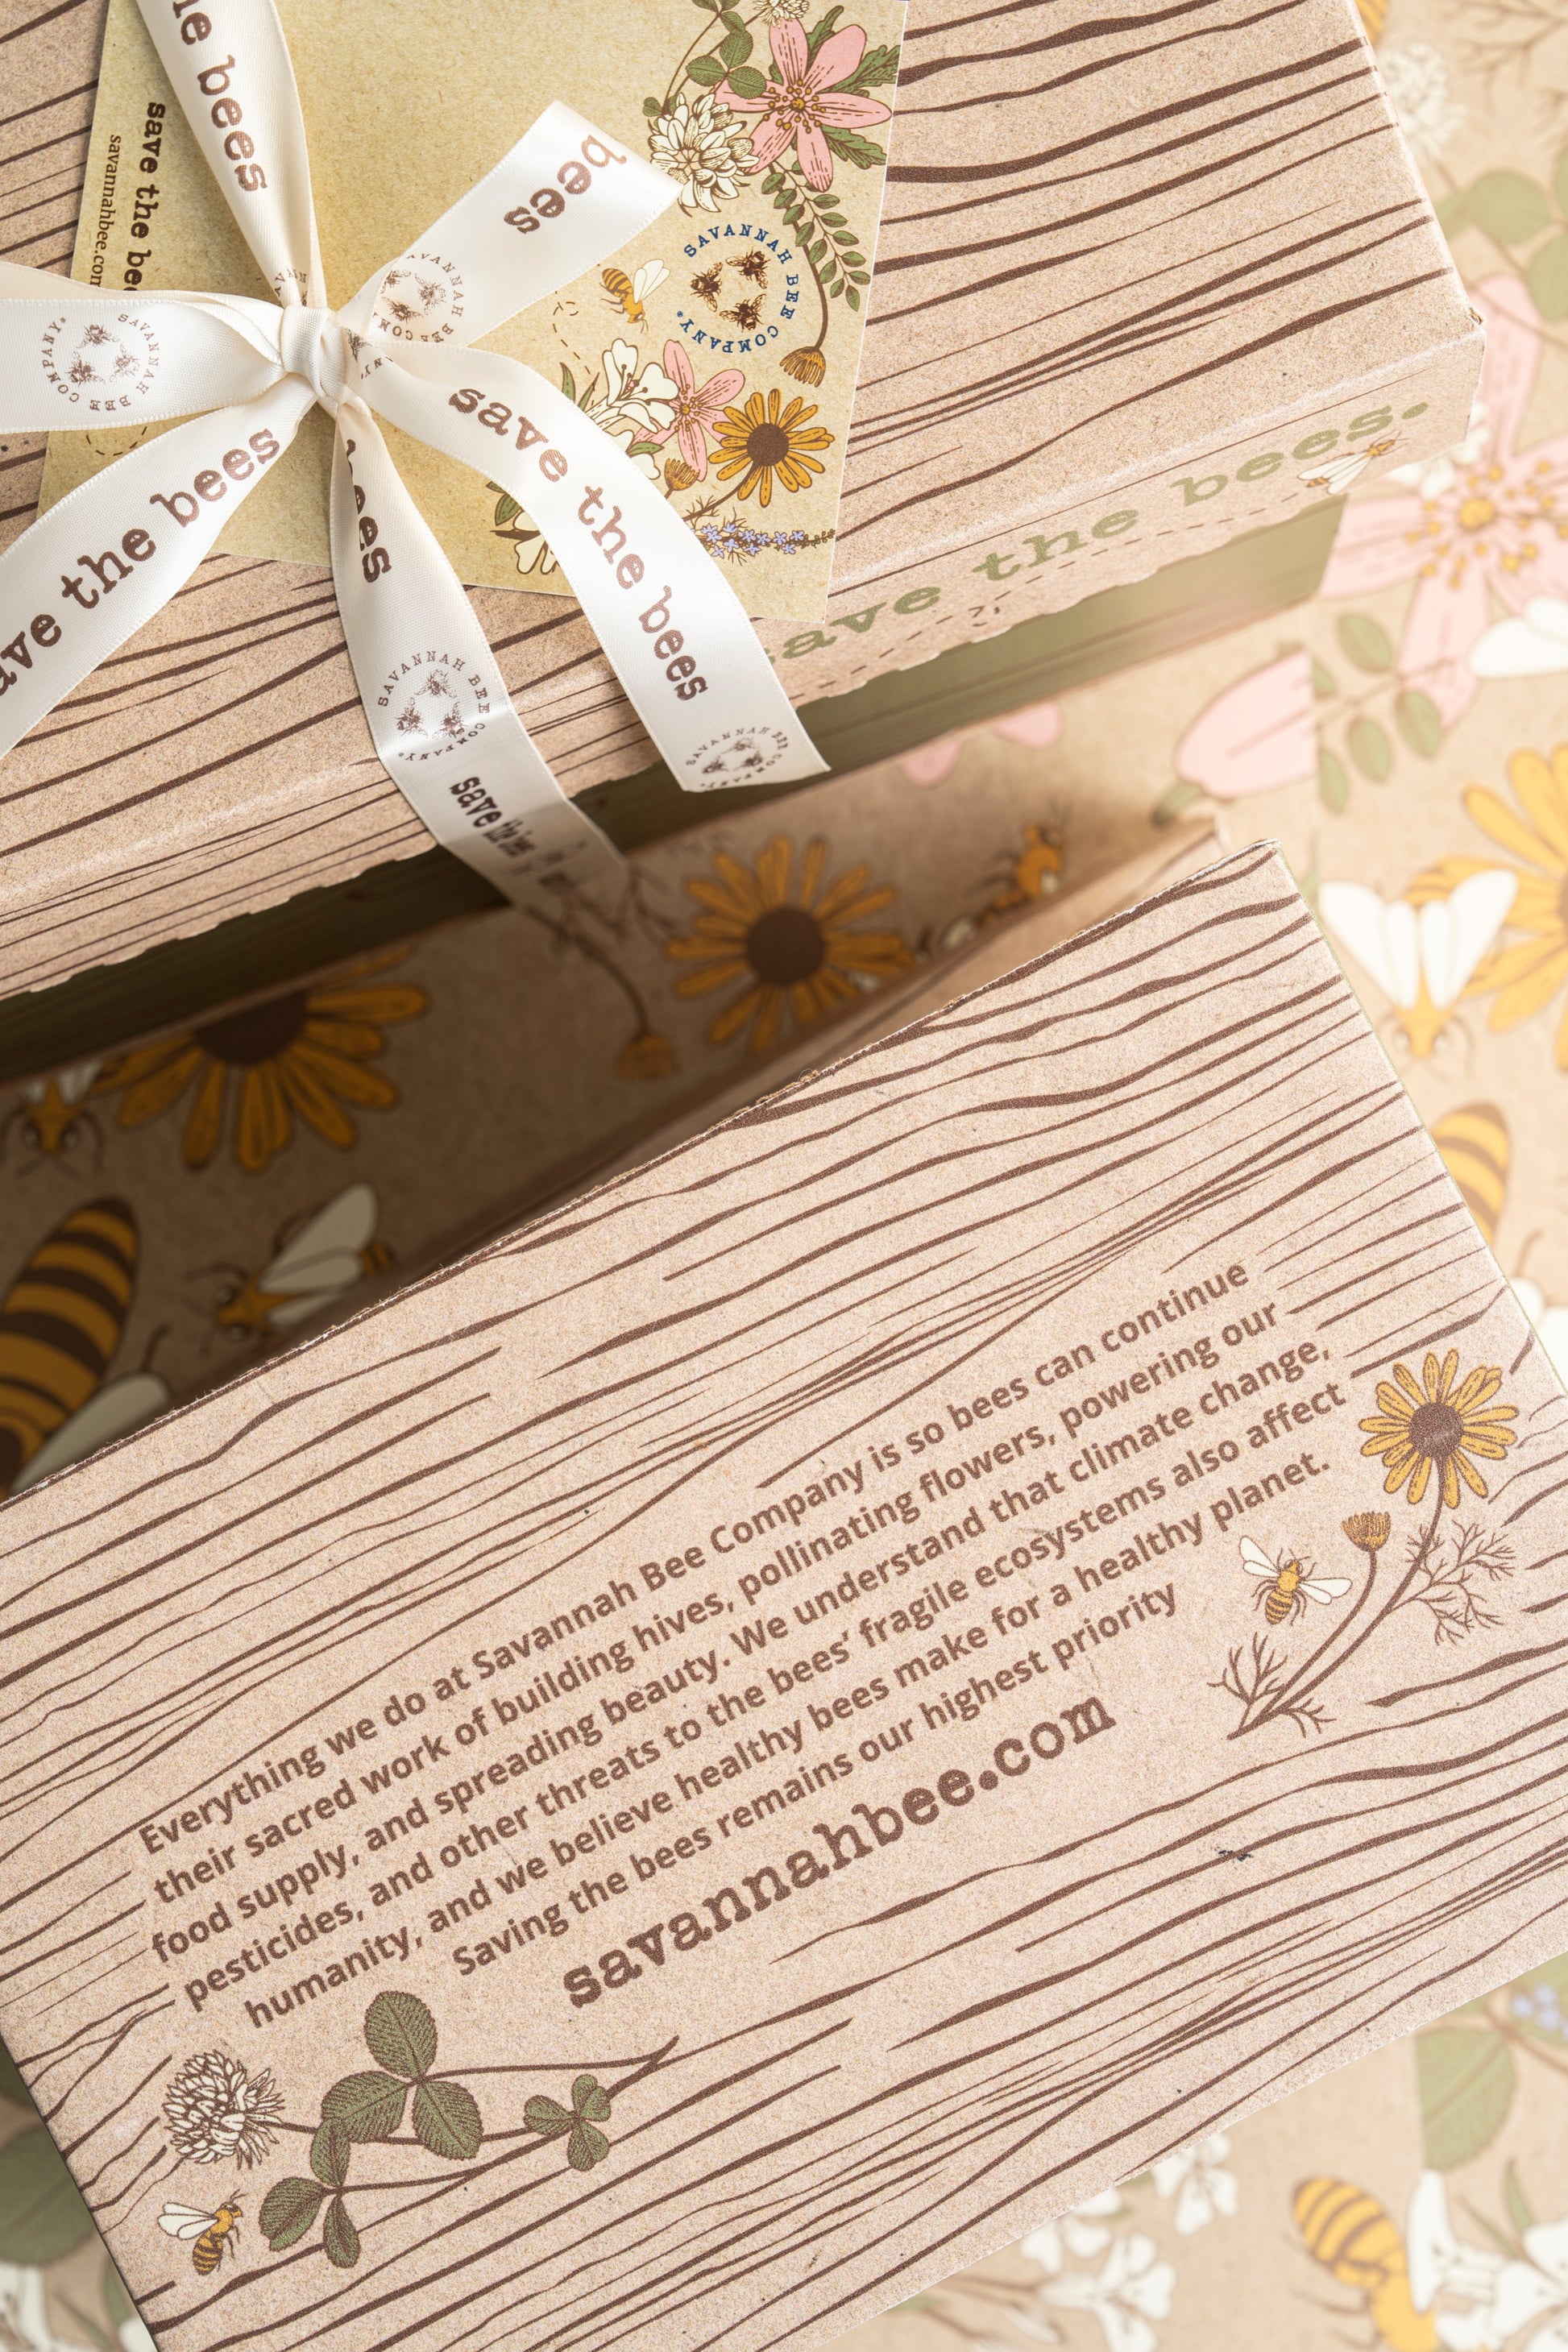 View of the underneath of the save the bees gift box with a quote and website.